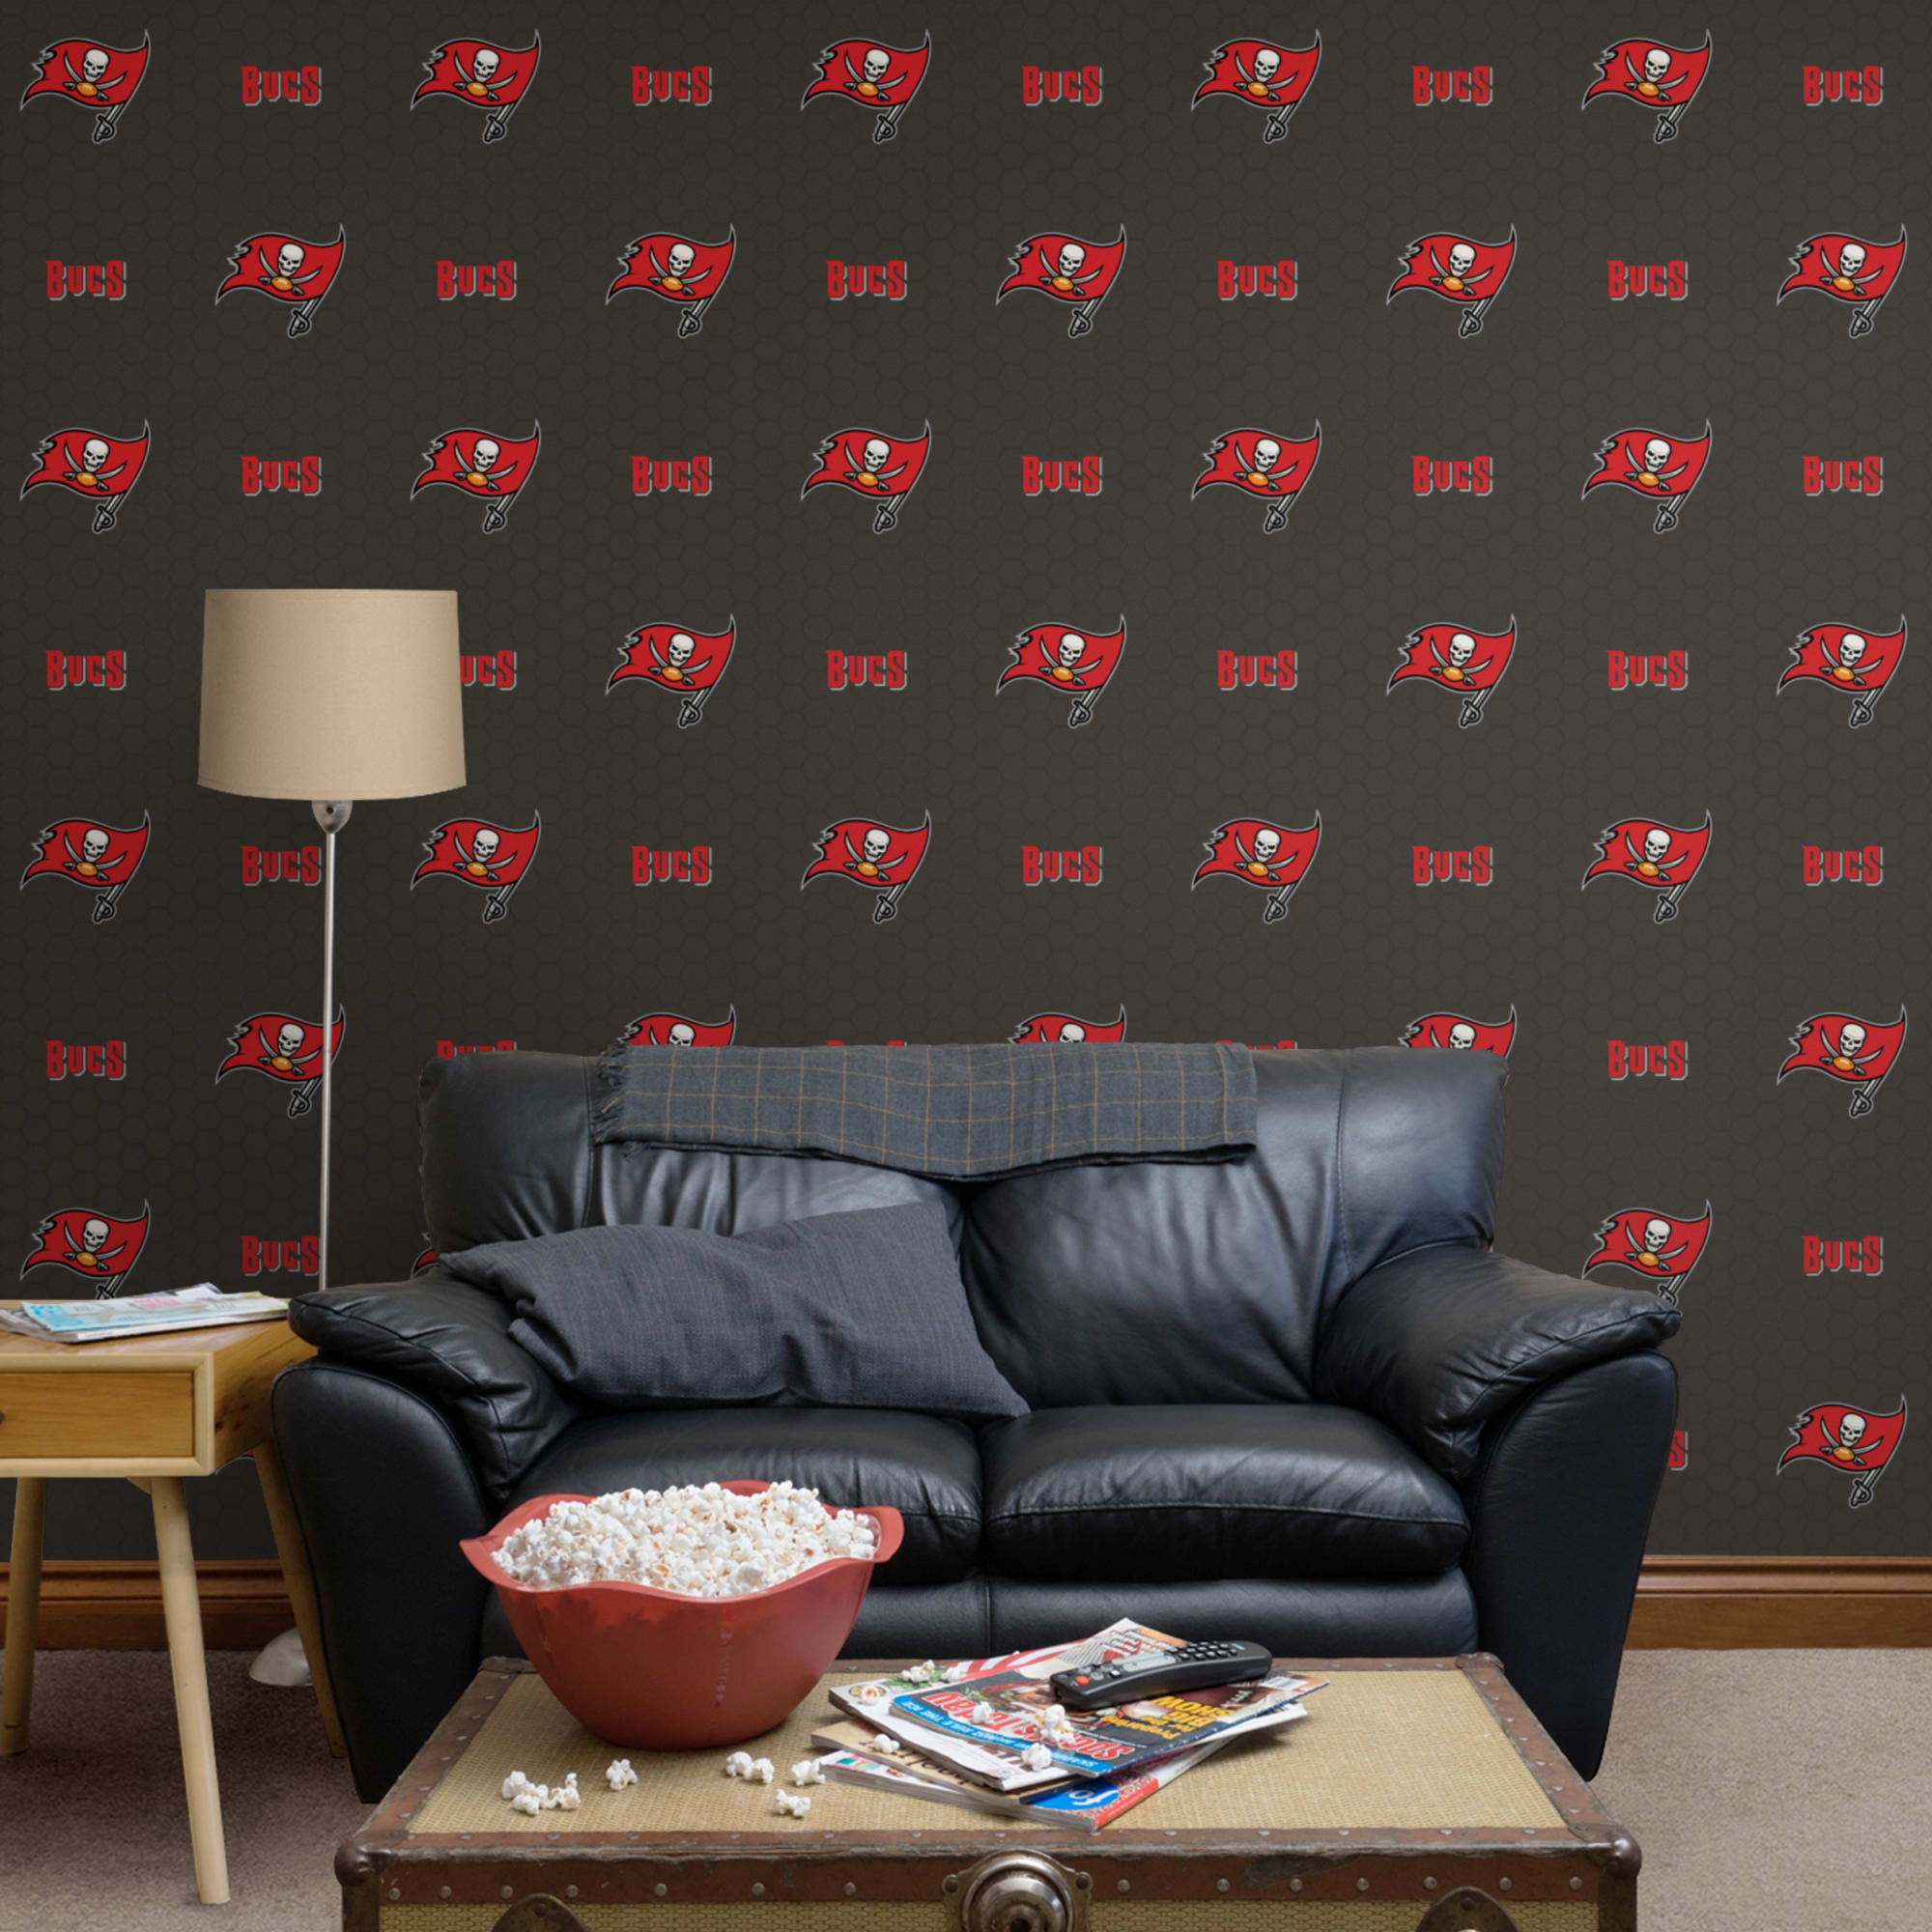 Tampa Bay Buccaneers: Logo Pattern - Officially Licensed NFL Removable Wallpaper 12" x 12" Sample by Fathead